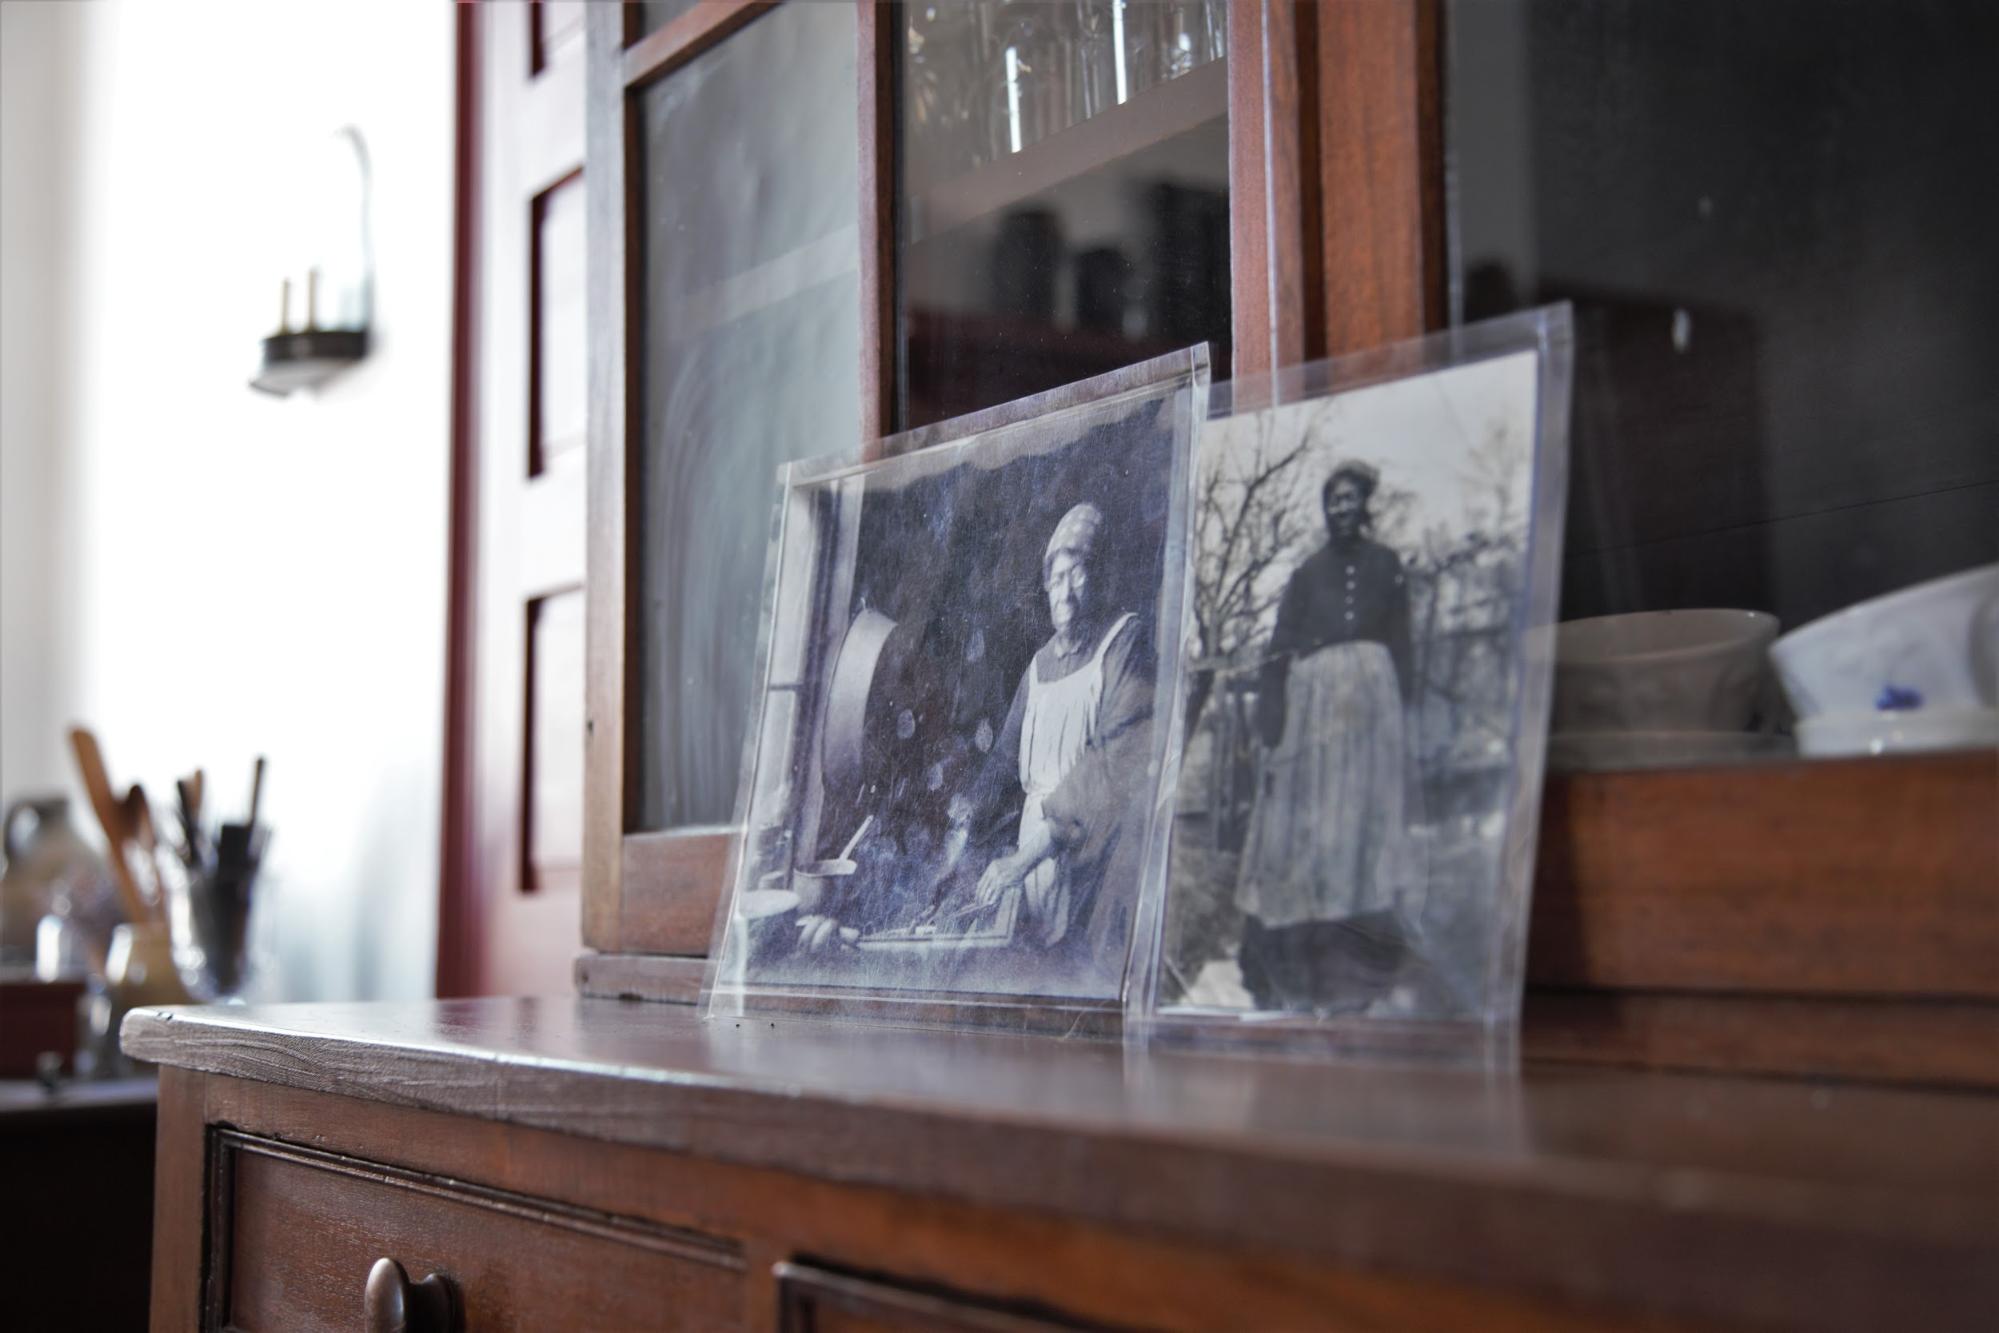 historic black and white pictures sitting on a china cabinet depicting African American woman